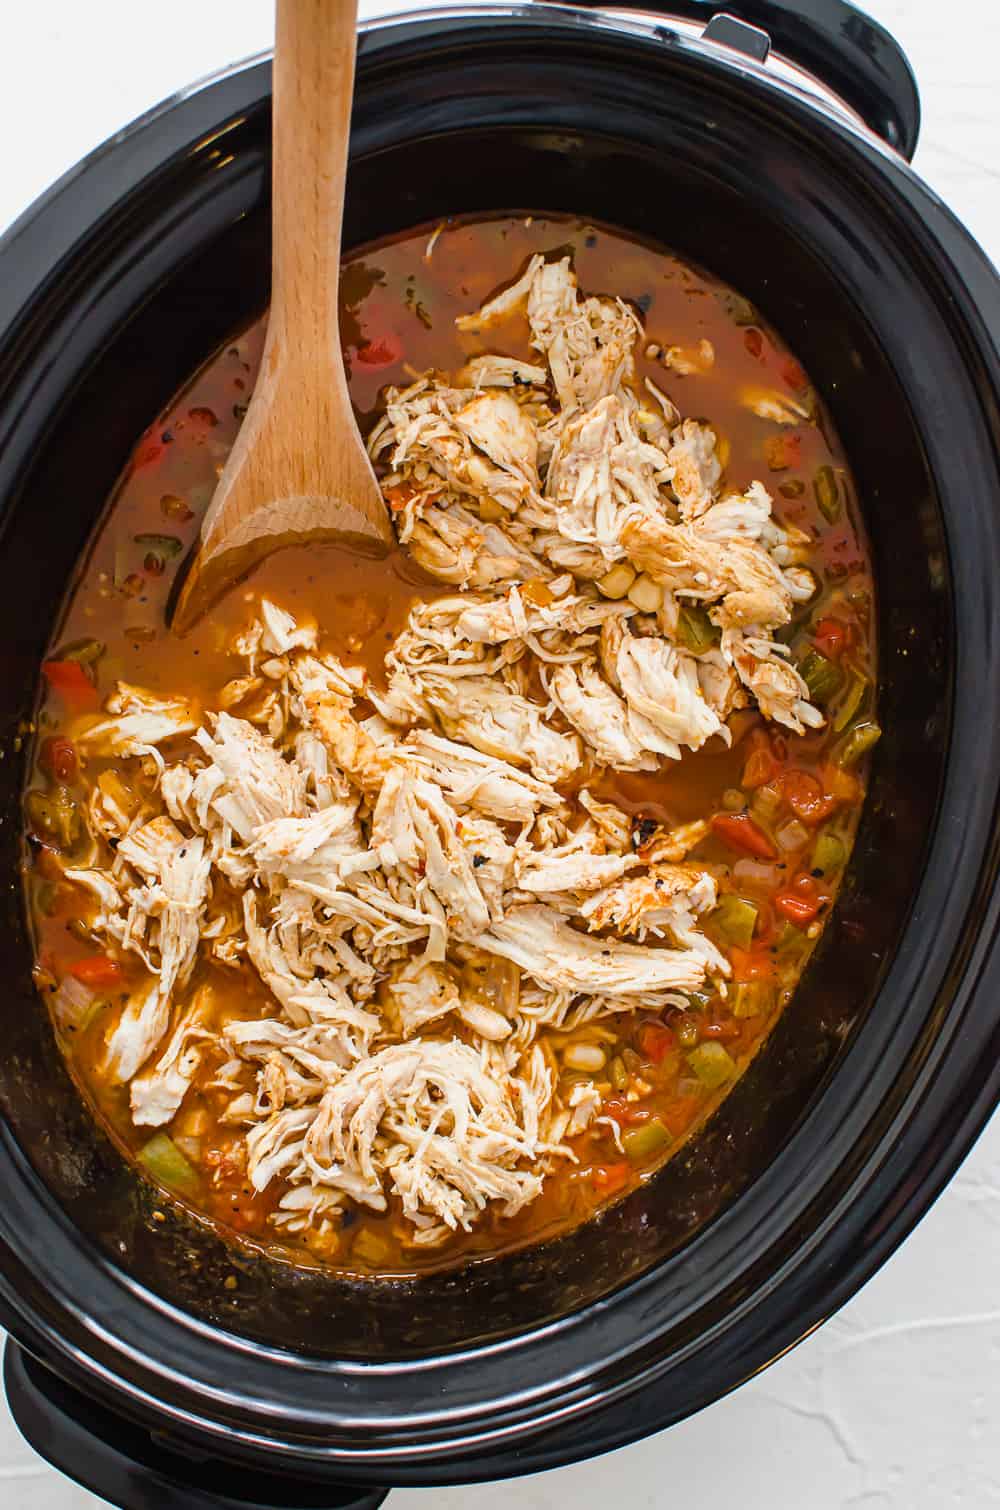 Shredded chicken placed on top of ingredients in a crock pot to make chicken taco soup.